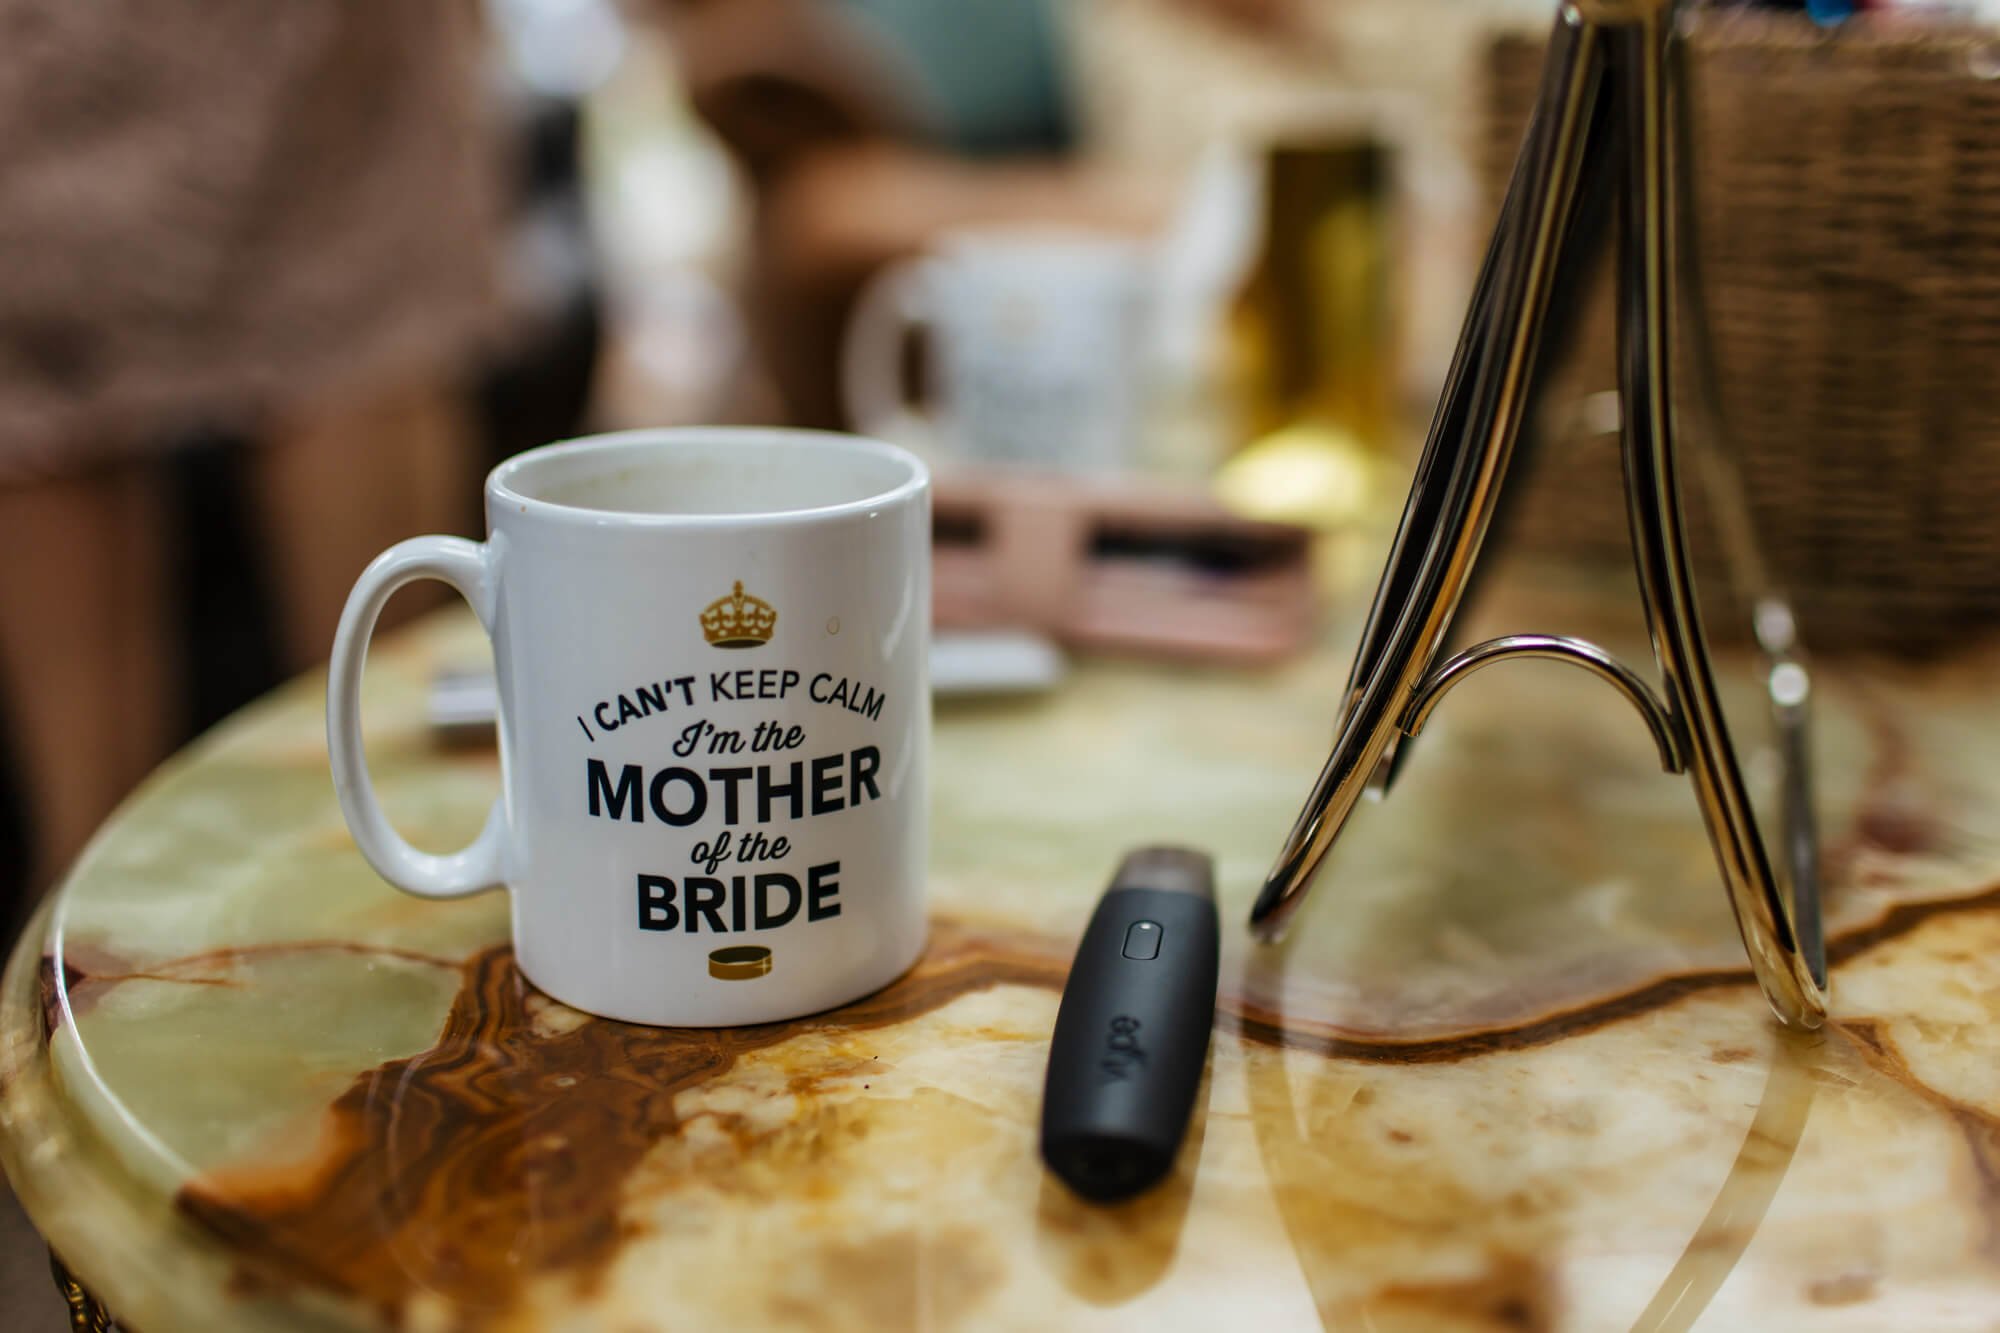 Mother of the bride mug for a wedding cuppa